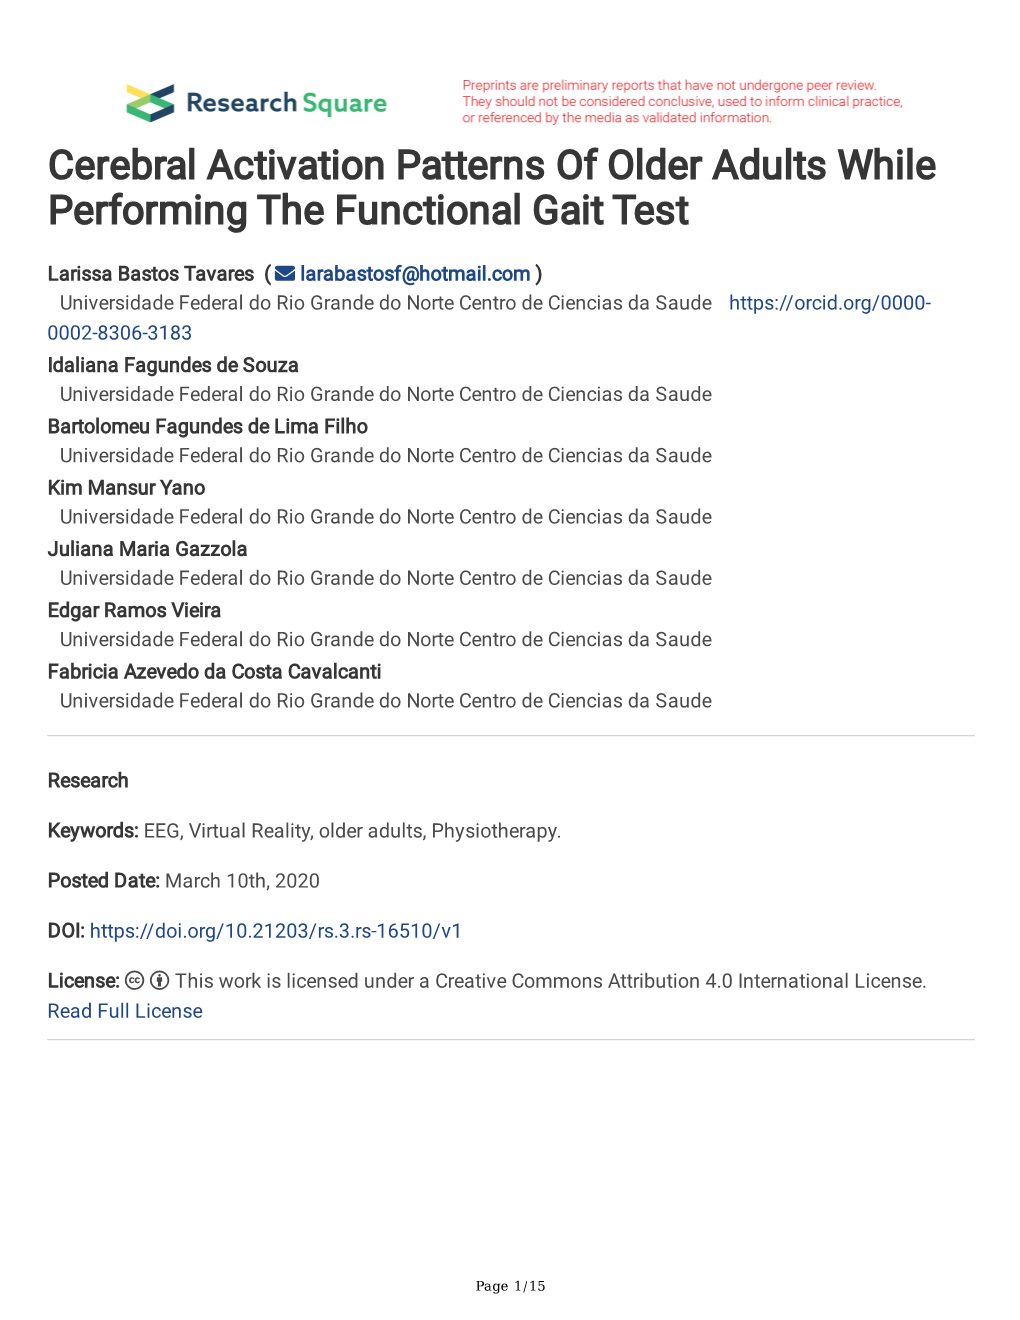 Cerebral Activation Patterns of Older Adults While Performing the Functional Gait Test